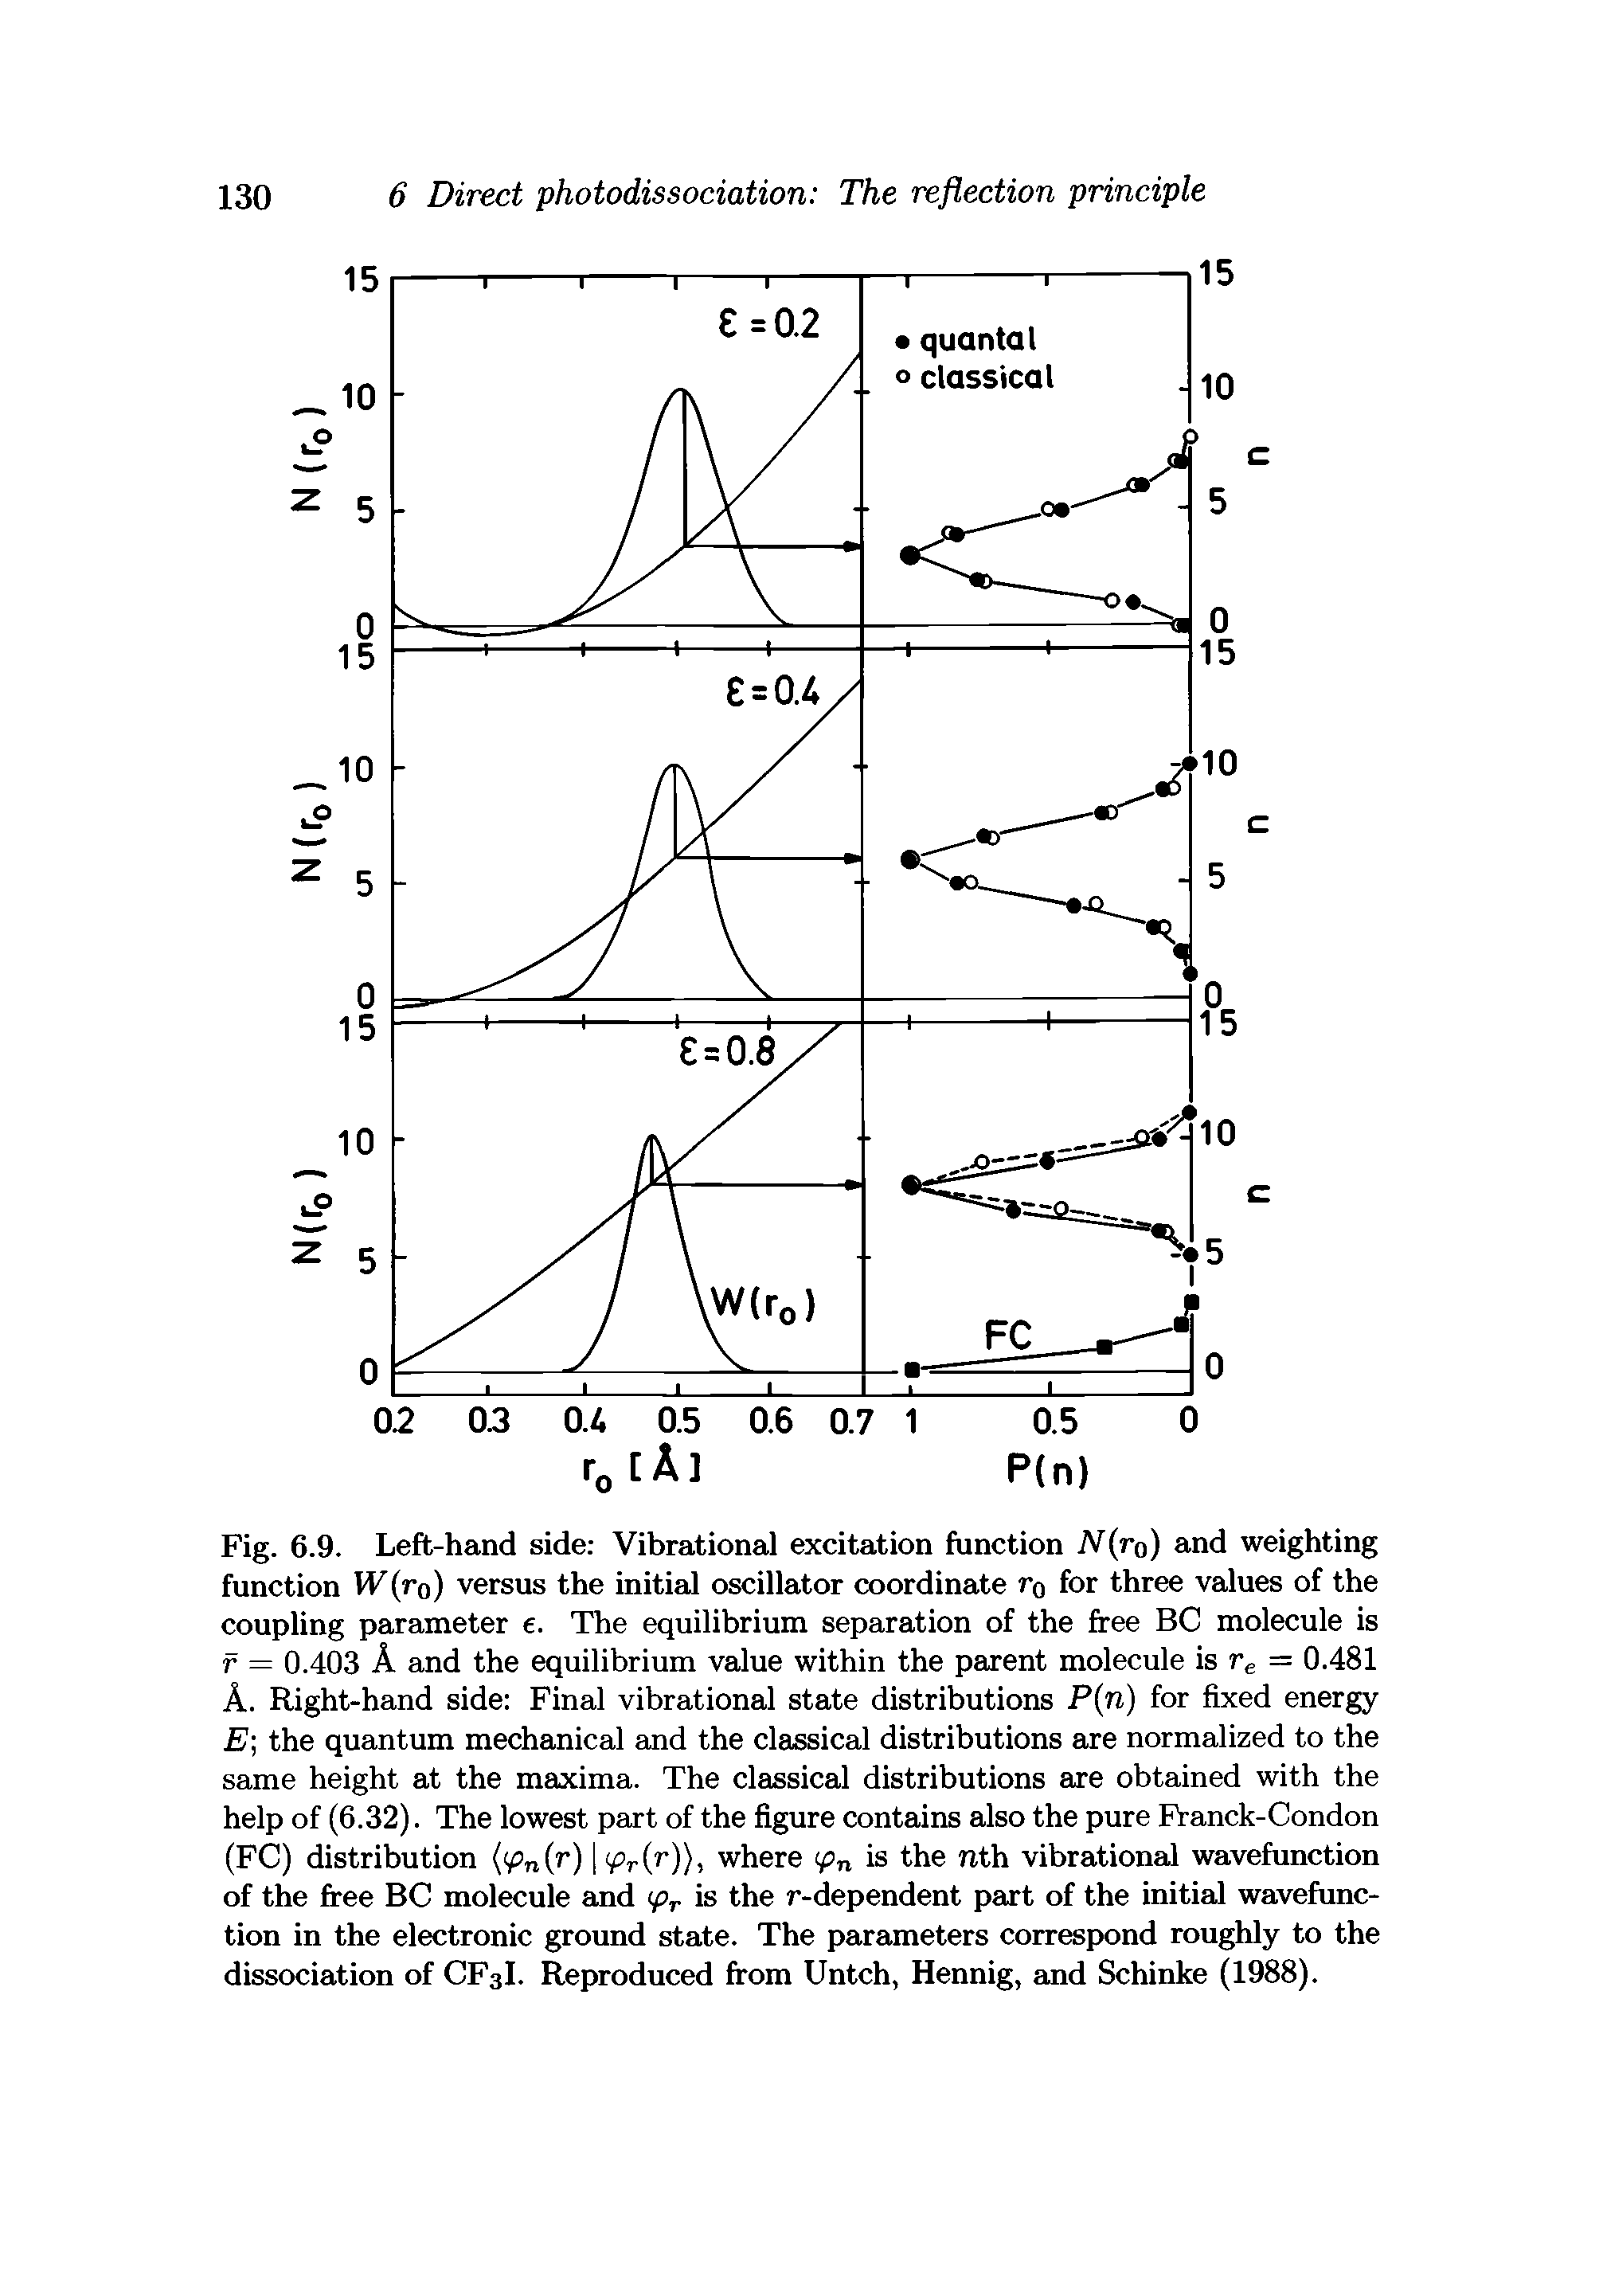 Fig. 6.9. Left-hand side Vibrational excitation function N(ro) and weighting function W(ro) versus the initial oscillator coordinate ro for three values of the coupling parameter e. The equilibrium separation of the free BC molecule is f = 0.403 A and the equilibrium value within the parent molecule is re = 0.481 A. Right-hand side Final vibrational state distributions P(n) for fixed energy E the quantum mechanical and the classical distributions are normalized to the same height at the maxima. The classical distributions are obtained with the help of (6.32). The lowest part of the figure contains also the pure Franck-Condon (FC) distribution (<fin(r) Pr(r)), where ipn is the nth vibrational wavefunction of the free BC molecule and <pr is the /"-dependent part of the initial wavefunction in the electronic ground state. The parameters correspond roughly to the dissociation of CF3I. Reproduced from Untch, Hennig, and Schinke (1988).